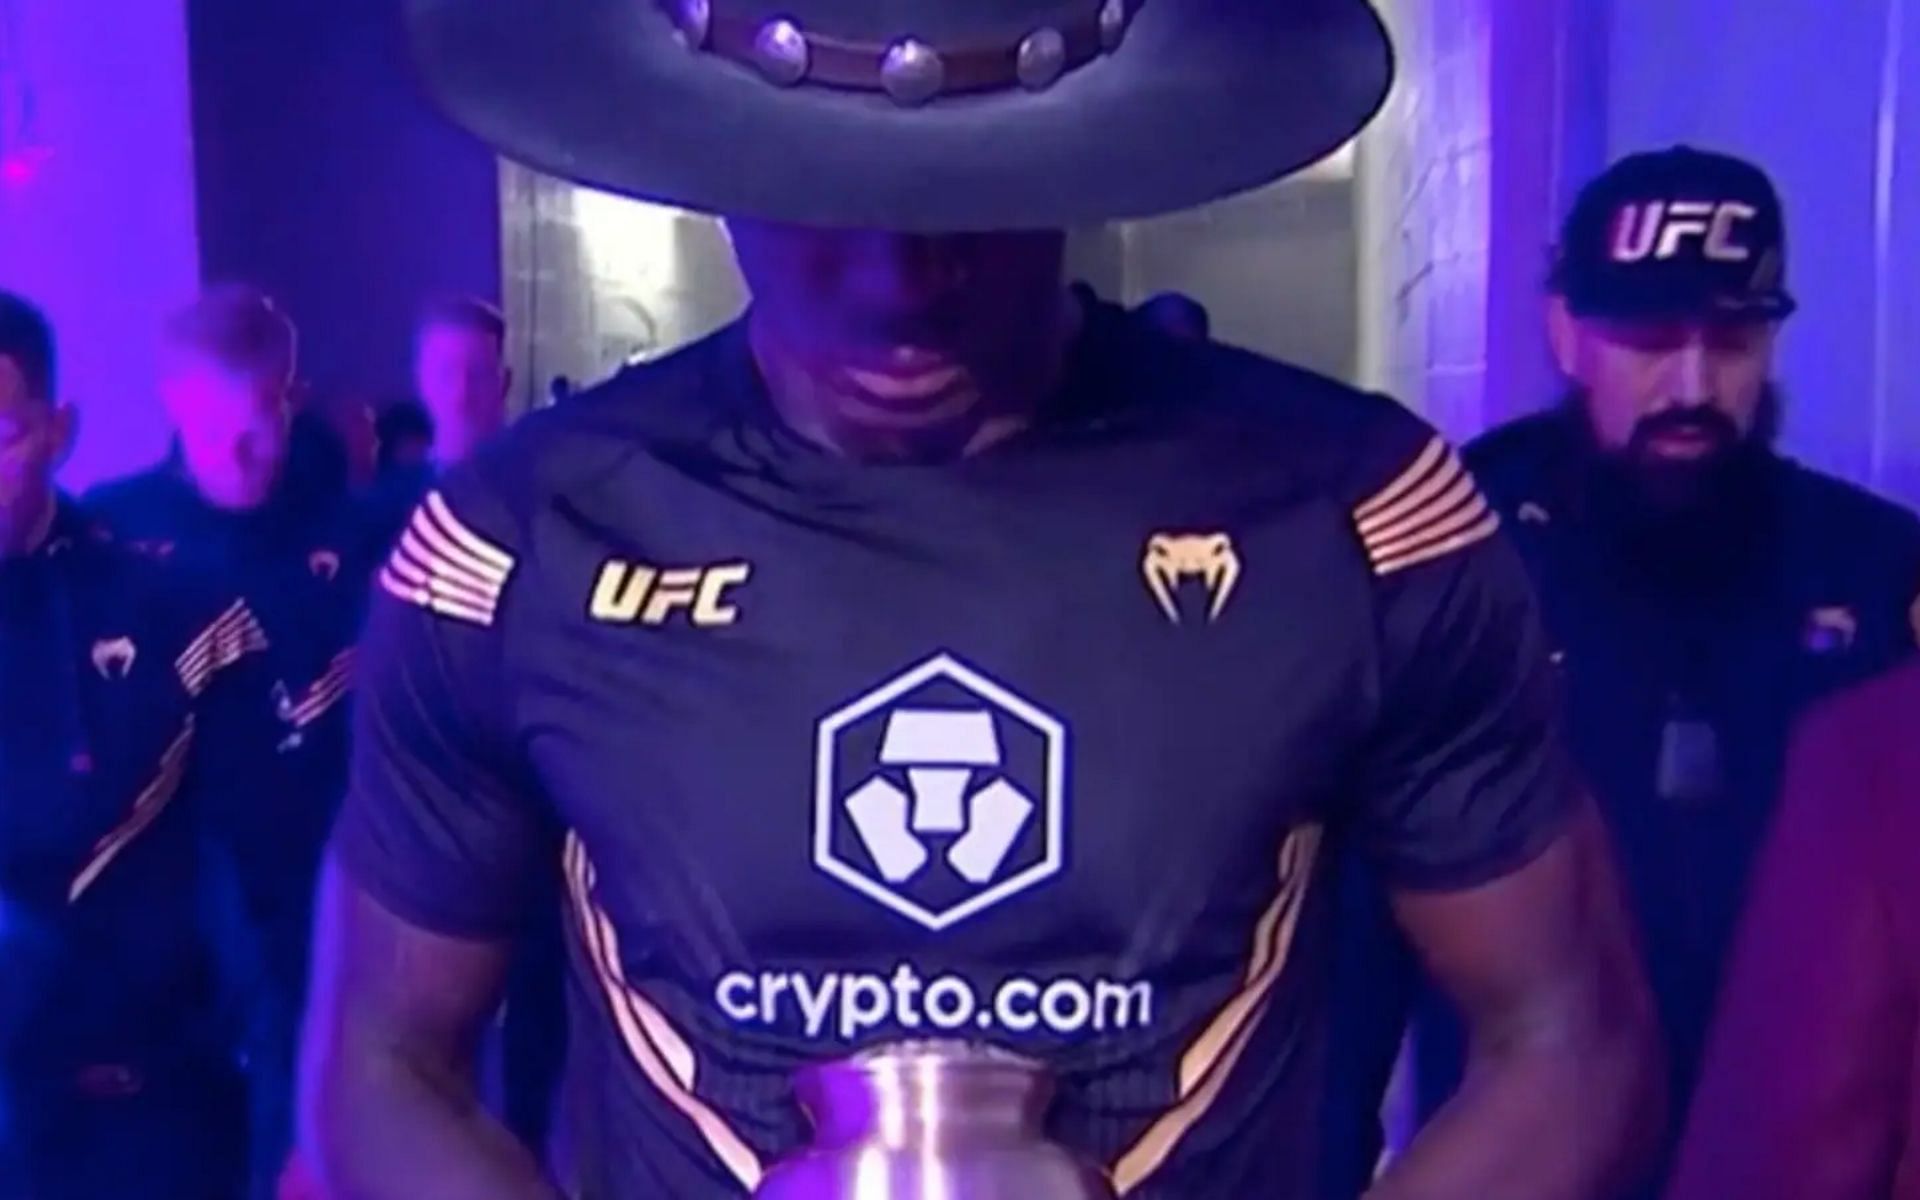 Israel Adesanya channelled WWE legend The Undertaker for his most recent walkout